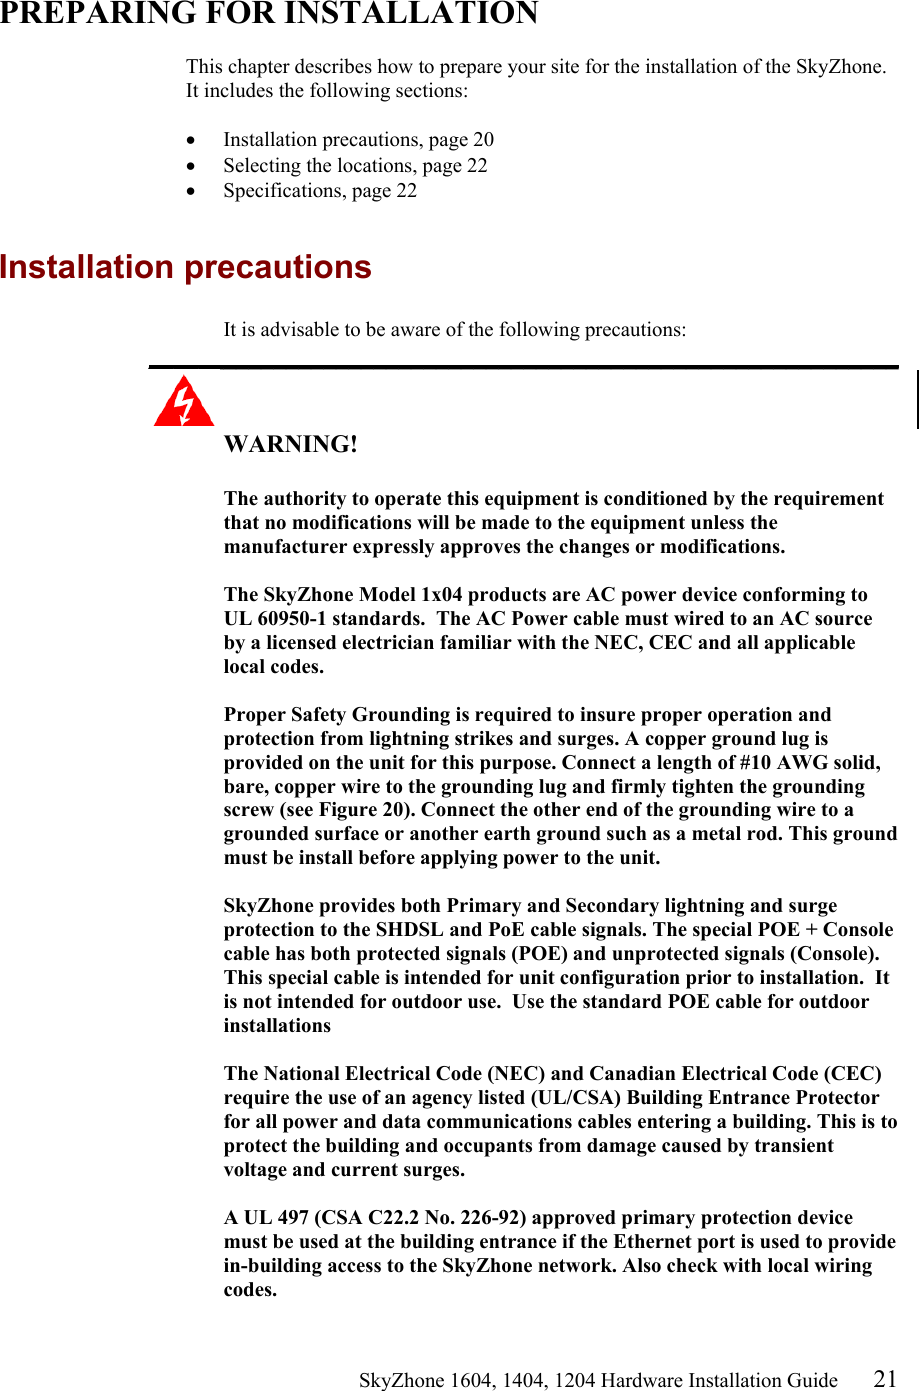                                                   SkyZhone 1604, 1404, 1204 Hardware Installation Guide 21  PREPARING FOR INSTALLATION  This chapter describes how to prepare your site for the installation of the SkyZhone. It includes the following sections:  •  Installation precautions, page 20 •  Selecting the locations, page 22 •  Specifications, page 22  Installation precautions It is advisable to be aware of the following precautions: ____________________________________________________________  WARNING!      The authority to operate this equipment is conditioned by the requirement that no modifications will be made to the equipment unless the manufacturer expressly approves the changes or modifications.  The SkyZhone Model 1x04 products are AC power device conforming to UL 60950-1 standards.  The AC Power cable must wired to an AC source by a licensed electrician familiar with the NEC, CEC and all applicable local codes.  Proper Safety Grounding is required to insure proper operation and protection from lightning strikes and surges. A copper ground lug is provided on the unit for this purpose. Connect a length of #10 AWG solid, bare, copper wire to the grounding lug and firmly tighten the grounding screw (see Figure 20). Connect the other end of the grounding wire to a grounded surface or another earth ground such as a metal rod. This ground must be install before applying power to the unit.  SkyZhone provides both Primary and Secondary lightning and surge protection to the SHDSL and PoE cable signals. The special POE + Console cable has both protected signals (POE) and unprotected signals (Console).  This special cable is intended for unit configuration prior to installation.  It is not intended for outdoor use.  Use the standard POE cable for outdoor installations  The National Electrical Code (NEC) and Canadian Electrical Code (CEC) require the use of an agency listed (UL/CSA) Building Entrance Protector for all power and data communications cables entering a building. This is to protect the building and occupants from damage caused by transient voltage and current surges.   A UL 497 (CSA C22.2 No. 226-92) approved primary protection device must be used at the building entrance if the Ethernet port is used to provide in-building access to the SkyZhone network. Also check with local wiring codes. 